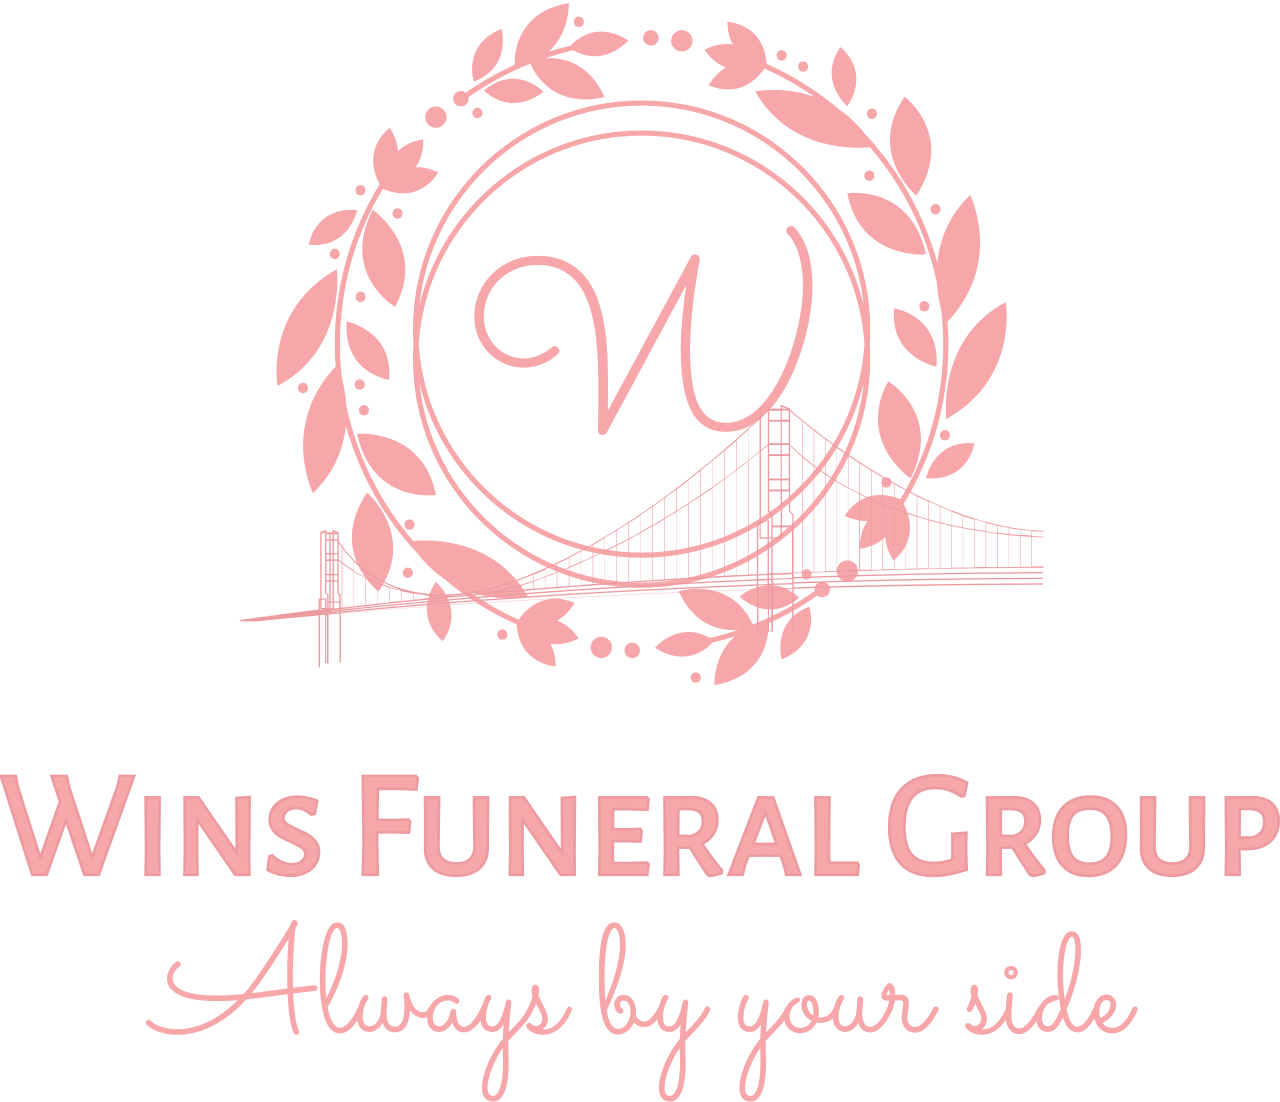 Wins Funeral Group's web page